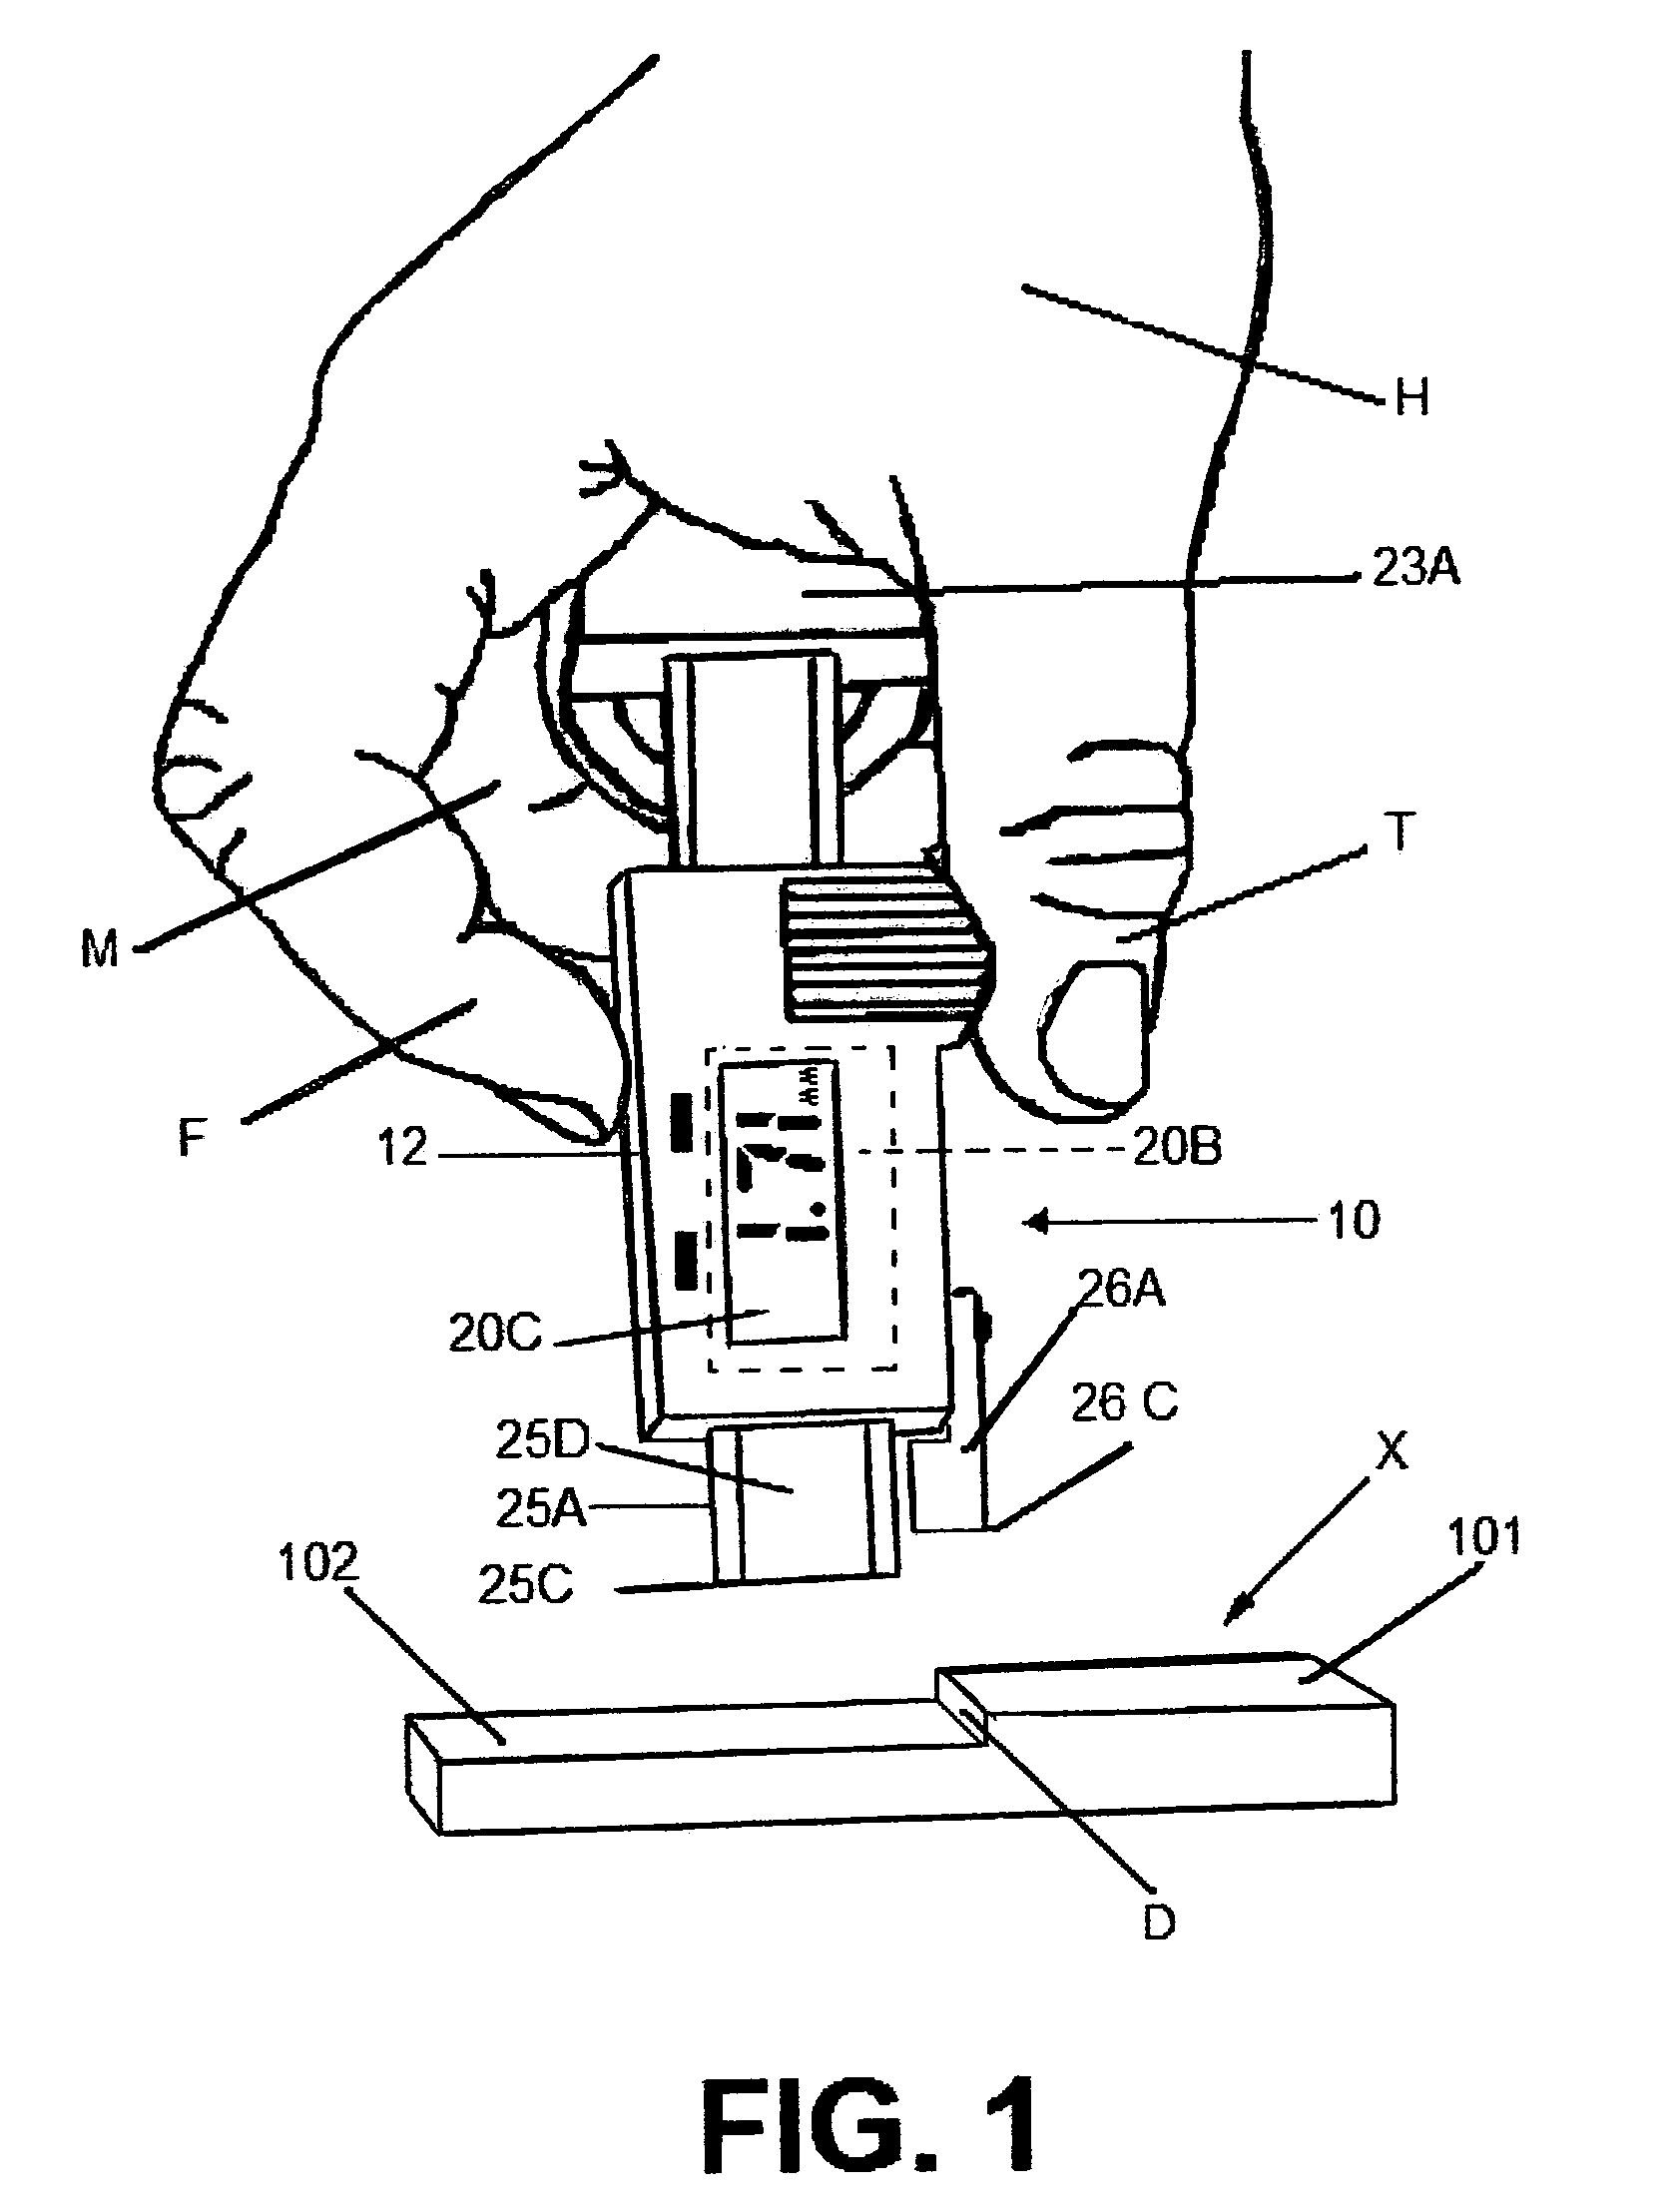 Apparatus for measuring step height or depth against another surface